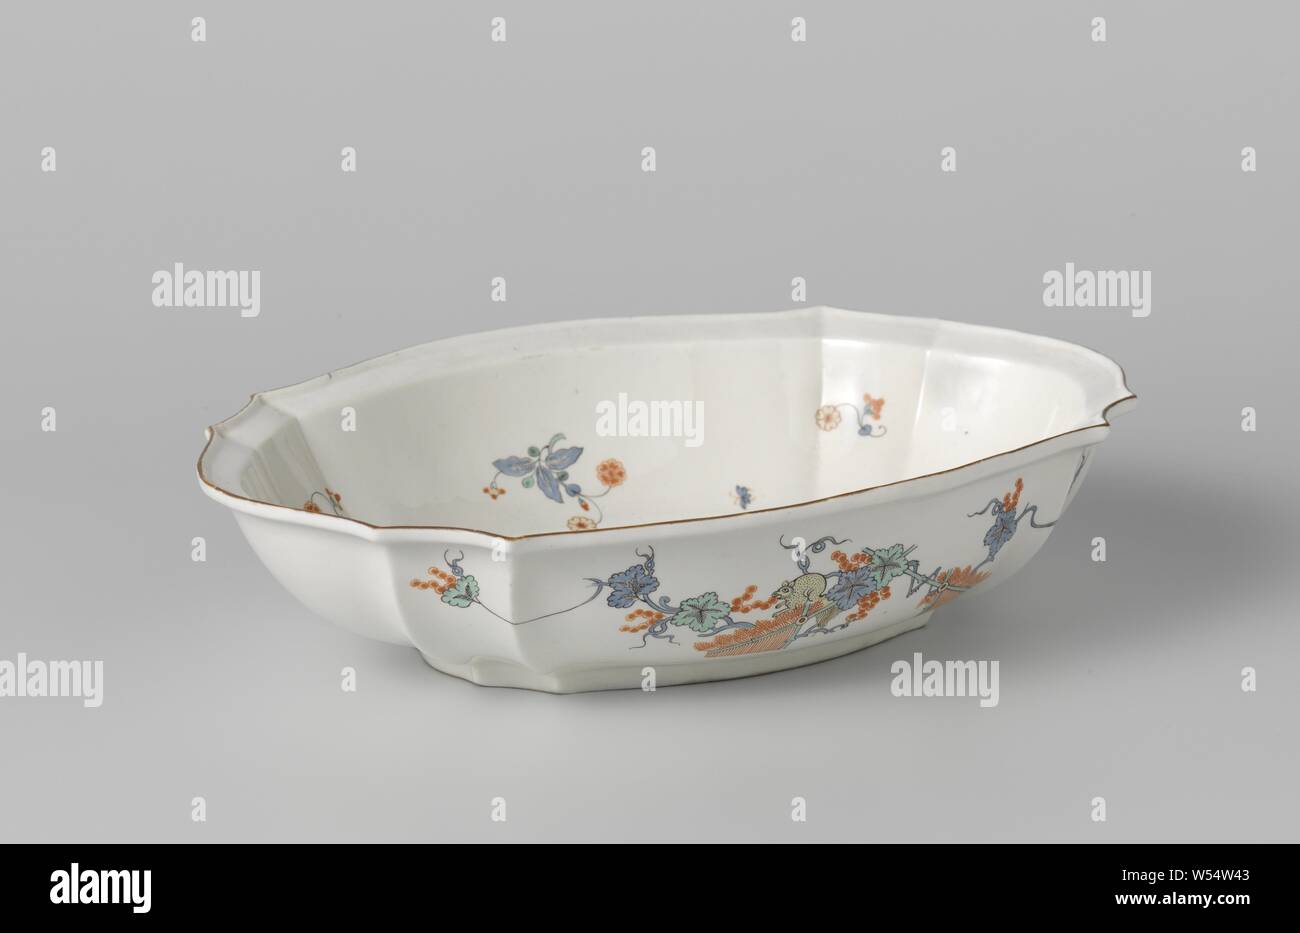 Bowl with a squirrel and flowering plants near a rock, Scalloped, oval bowl of soft-paste porcelain (pâte tendre), painted on the glaze in blue, red, green, yellow and black. Flowering plants (chrysanthemum) on the outside wall behind a bamboo fence near a rock and on the other side a squirrel on vines near a fence. A butterfly on the narrow sides. One large and smaller flower spheres with butterflies on the inside. Brown border. Marked on the bottom with the handset. The jug is in the style of the Japanese Kakiemon porcelain., Chantilly, c. 1740, porcelain (material), soft-paste porcelain Stock Photo